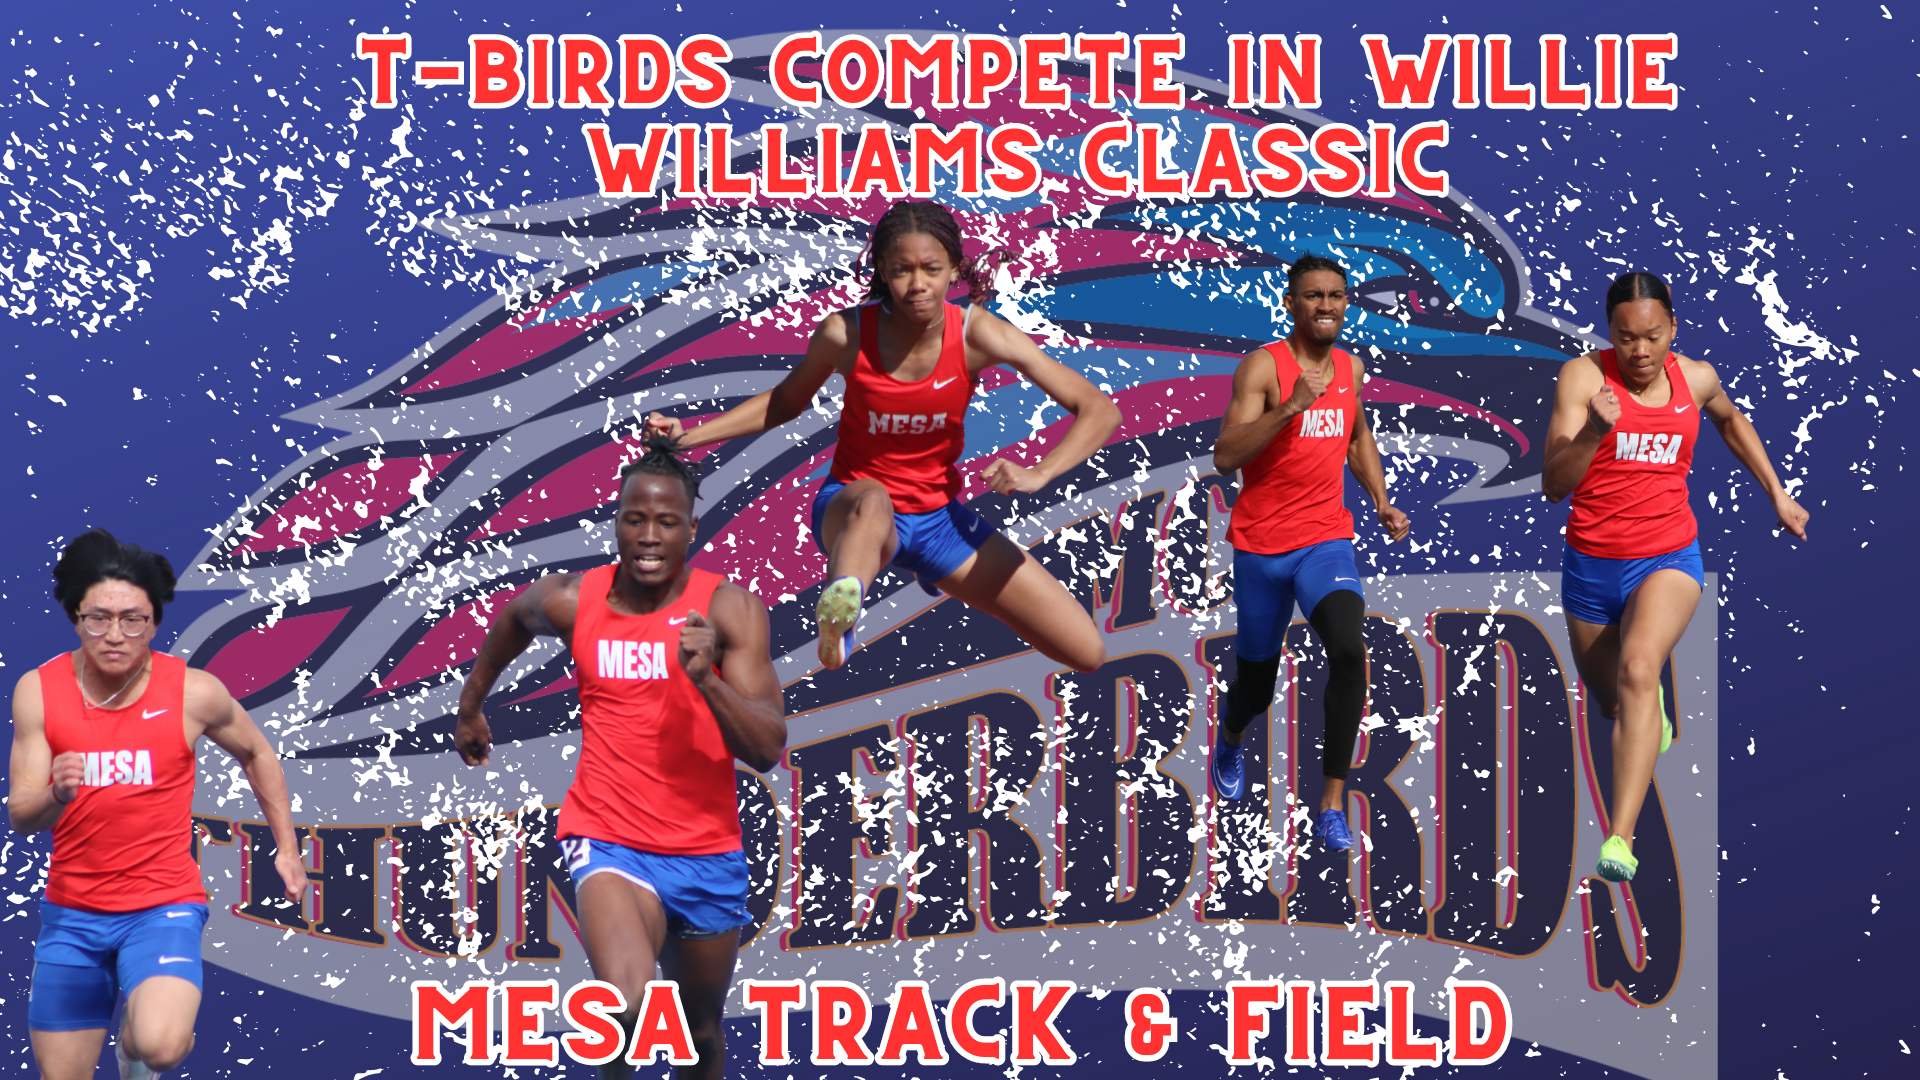 Mesa Track & Field battled at Willie Williams Classic over the weekend